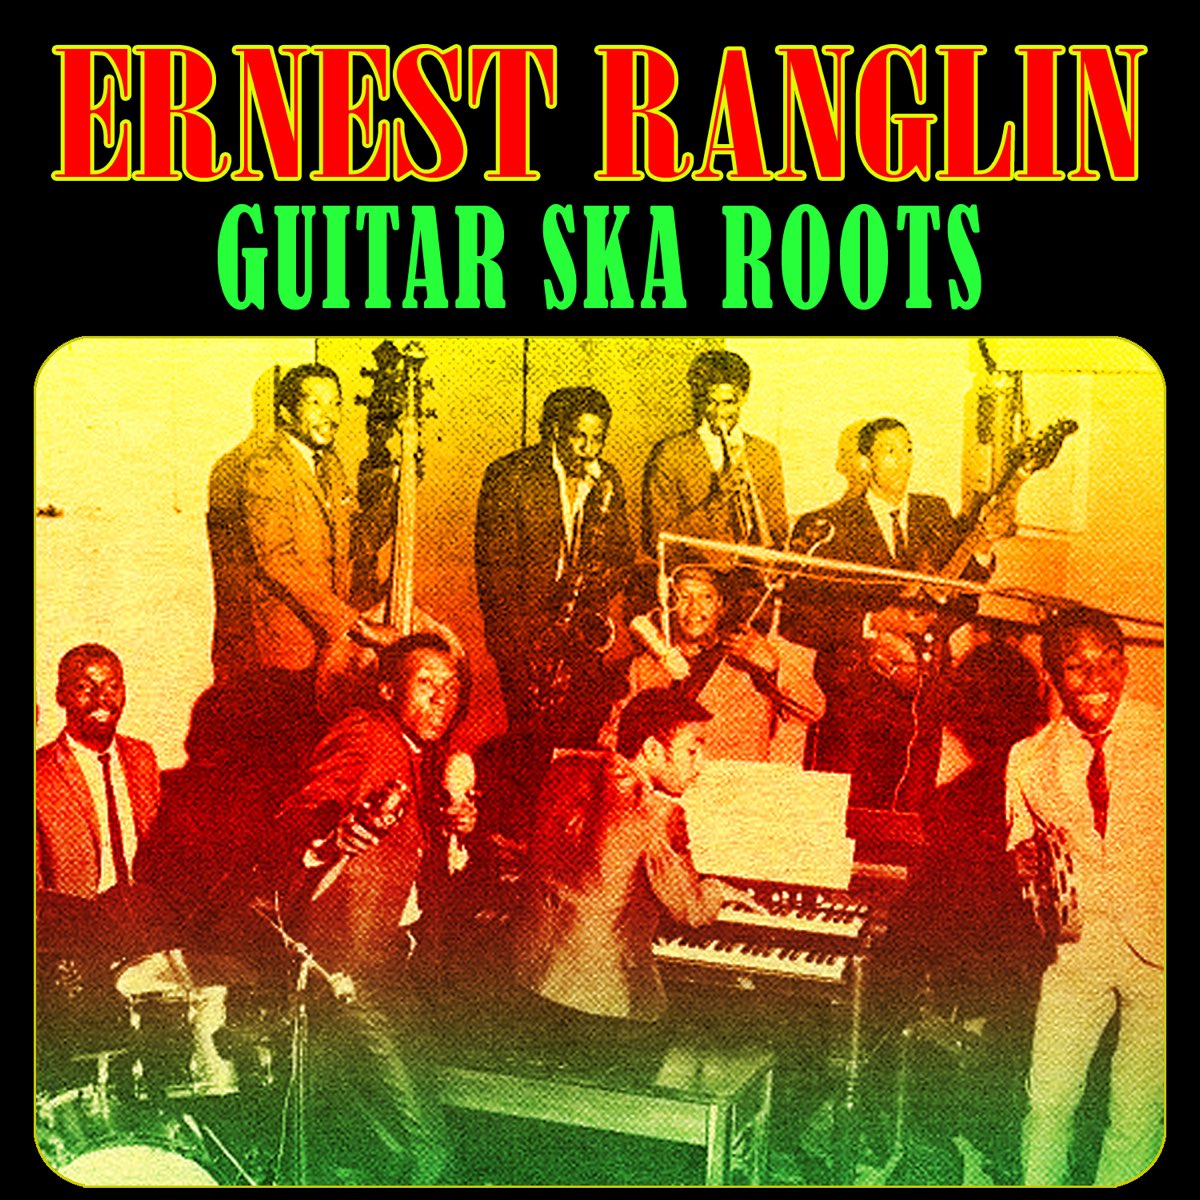 Guitar Ska Roots by Ernest Ranglin on Apple Music